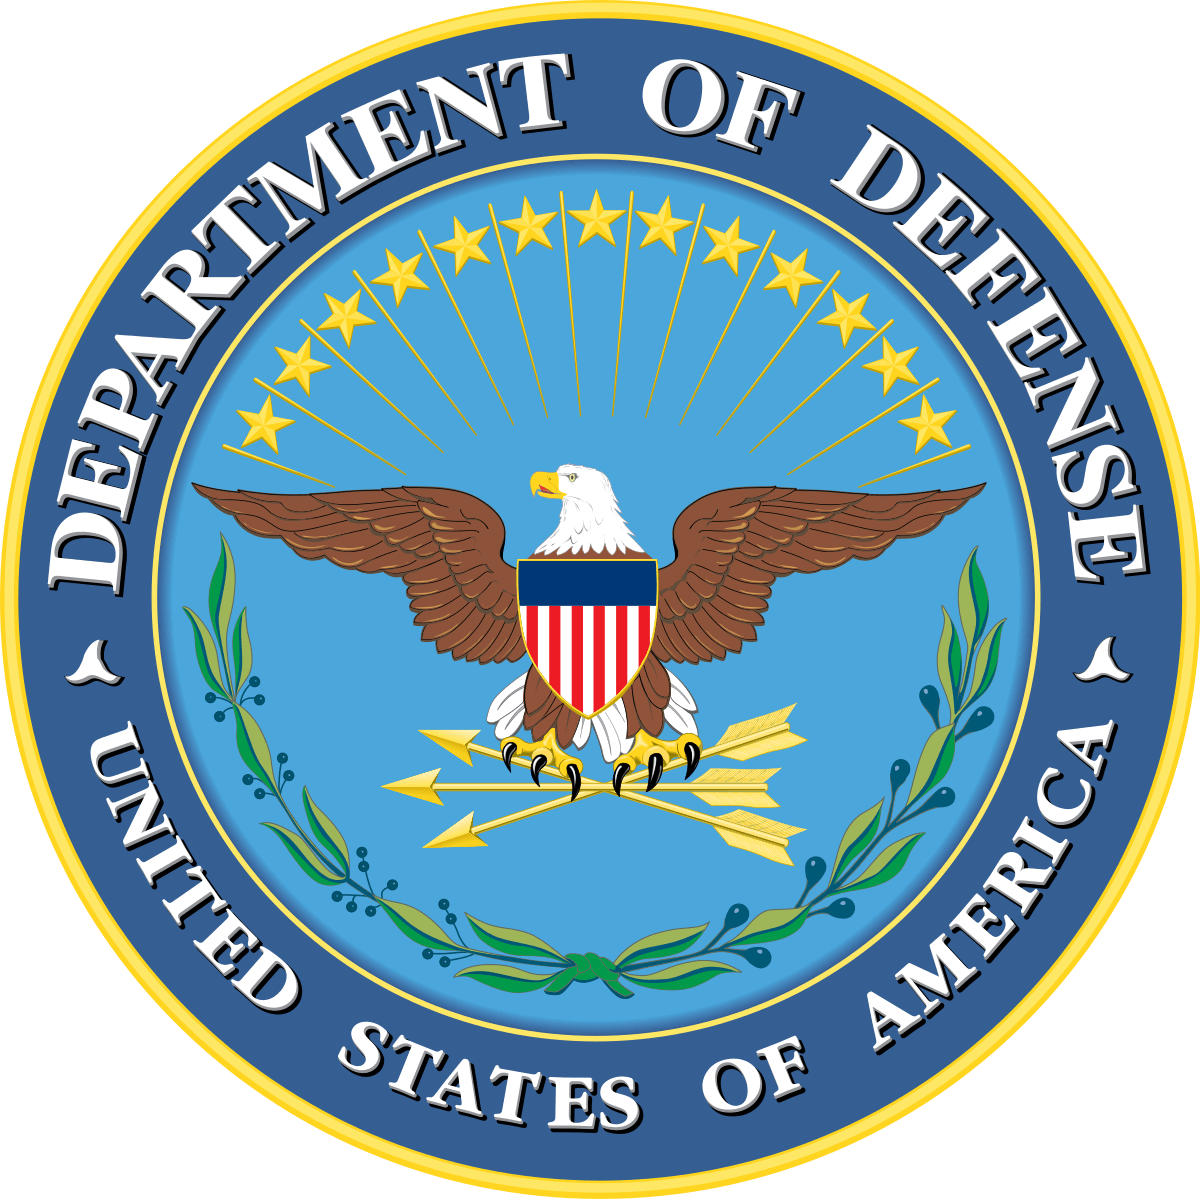 The Department Logo - United States Department of Defense